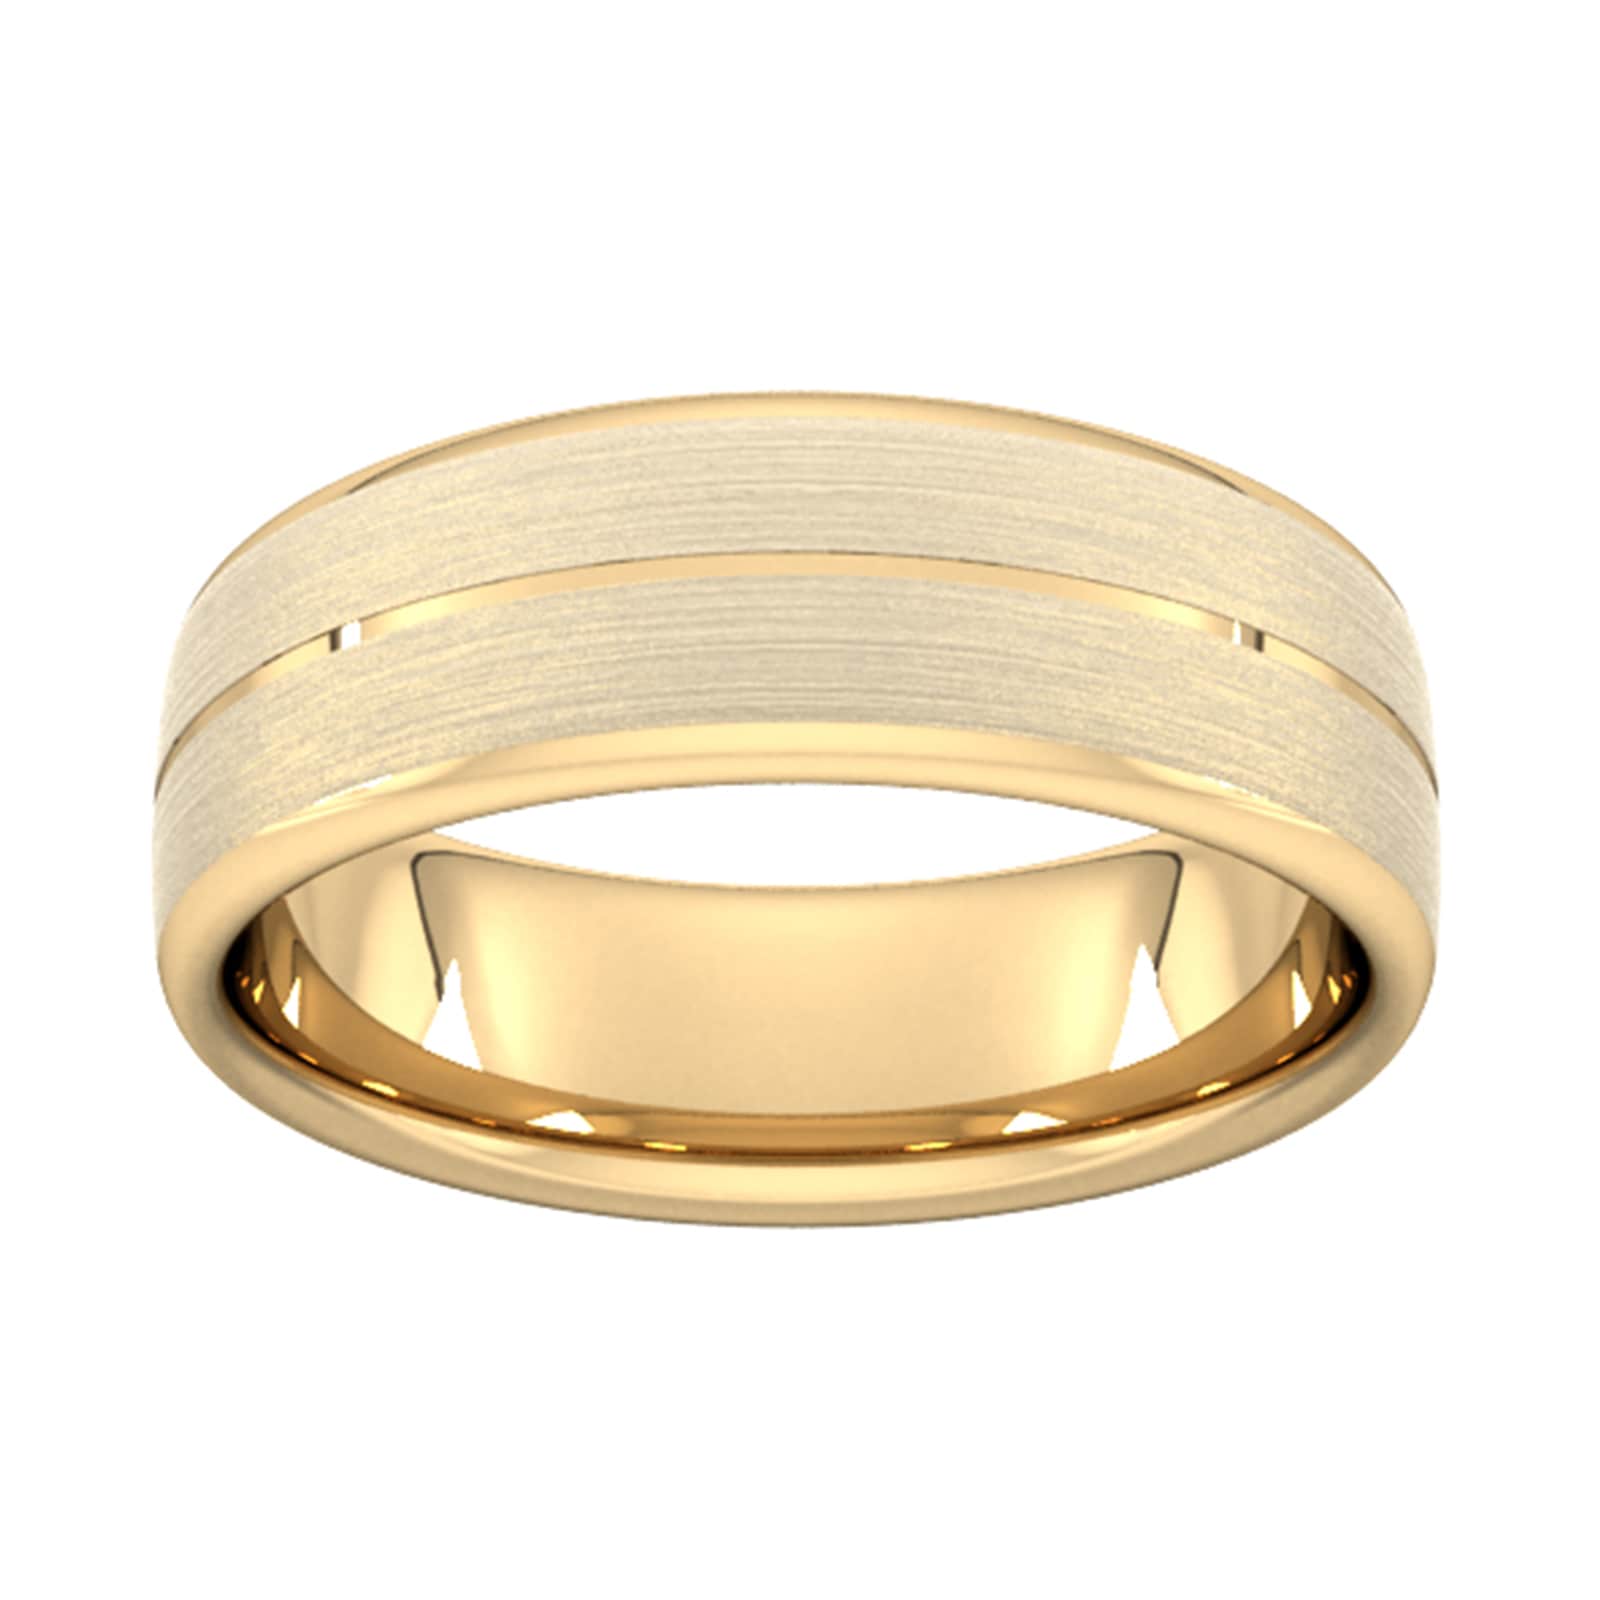 7mm D Shape Heavy Centre Groove With Chamfered Edge Wedding Ring In 9 Carat Yellow Gold - Ring Size K